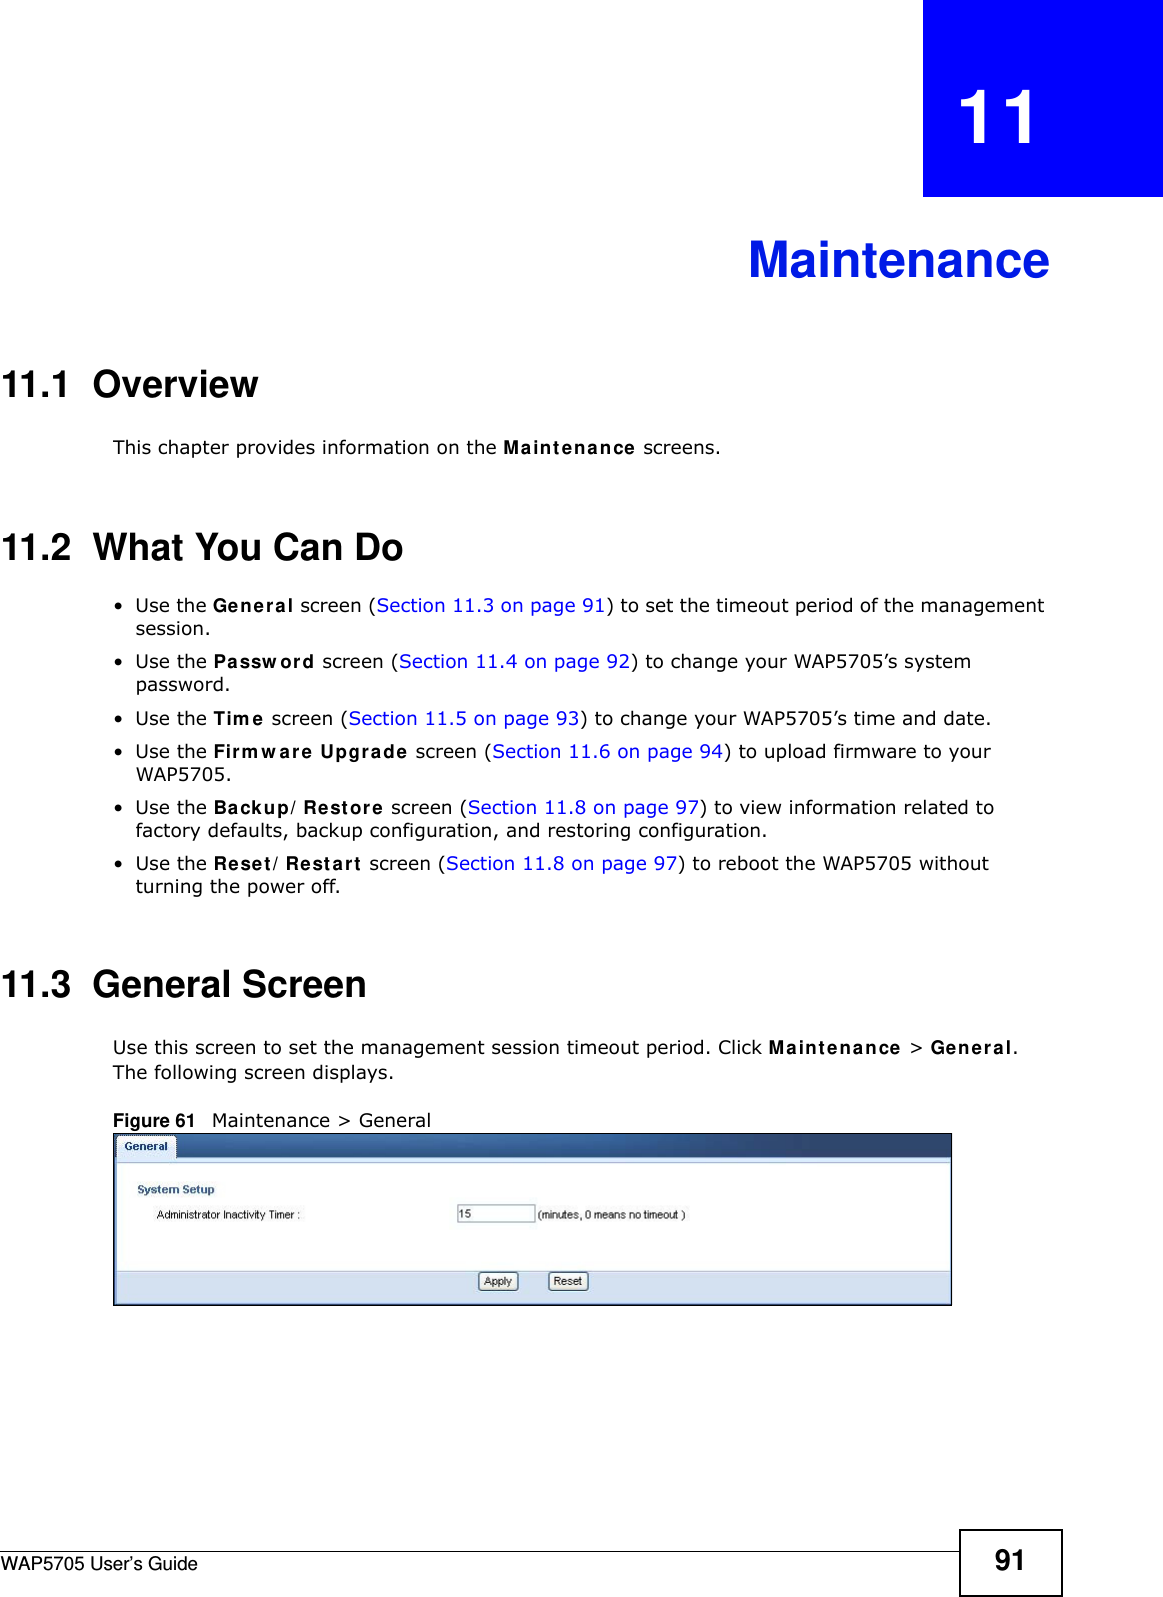 WAP5705 User’s Guide 91CHAPTER   11Maintenance11.1  OverviewThis chapter provides information on the Ma int enan ce screens. 11.2  What You Can Do•Use the General screen (Section 11.3 on page 91) to set the timeout period of the management session. •Use the Passw ord screen (Section 11.4 on page 92) to change your WAP5705’s system password.•Use the Tim e  screen (Section 11.5 on page 93) to change your WAP5705’s time and date.•Use the Firm w ar e  Upgr a de  screen (Section 11.6 on page 94) to upload firmware to your WAP5705.•Use the Backup/ Re stor e screen (Section 11.8 on page 97) to view information related to factory defaults, backup configuration, and restoring configuration.•Use the Re se t / Re st a r t  screen (Section 11.8 on page 97) to reboot the WAP5705 without turning the power off.11.3  General Screen    Use this screen to set the management session timeout period. Click M a int e n an ce  &gt; Ge ner a l. The following screen displays.Figure 61   Maintenance &gt; General 